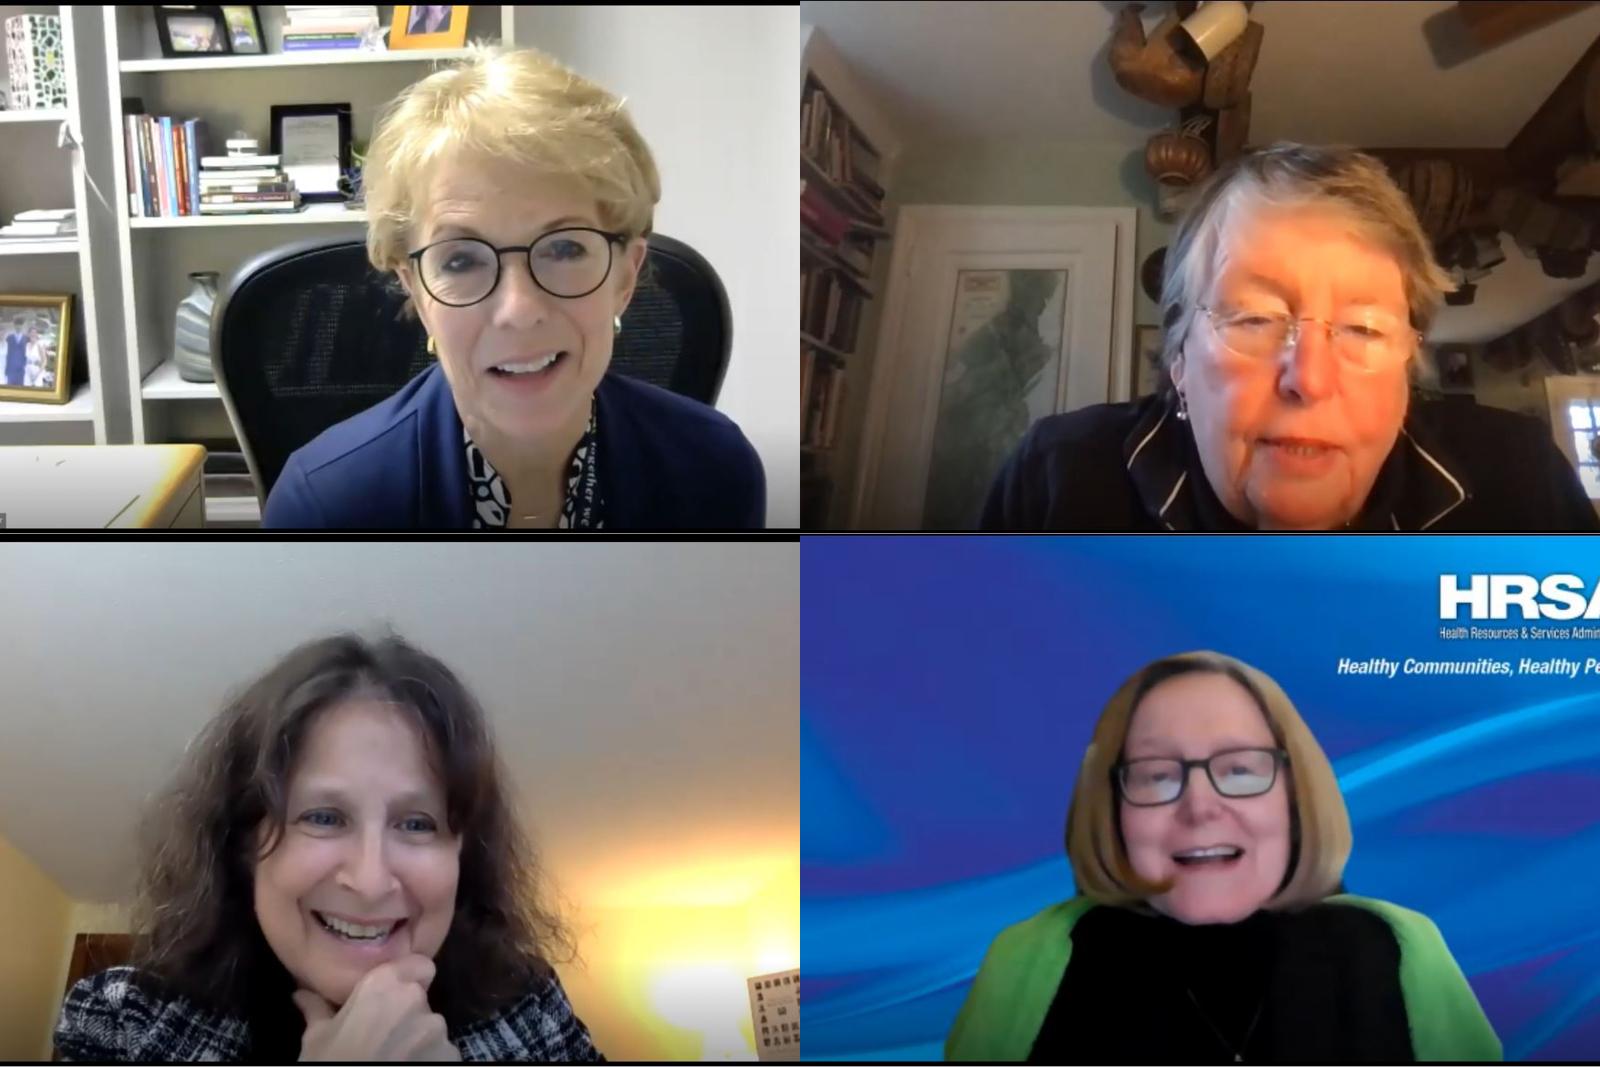 Members of the Advisory Group discuss the initiative’s progress. Clockwise from upper left: Dr. JoAnne Reifsnyder, Ann Torregrossa, Dr. Alice Bonner, and Dr. Joan Weiss.